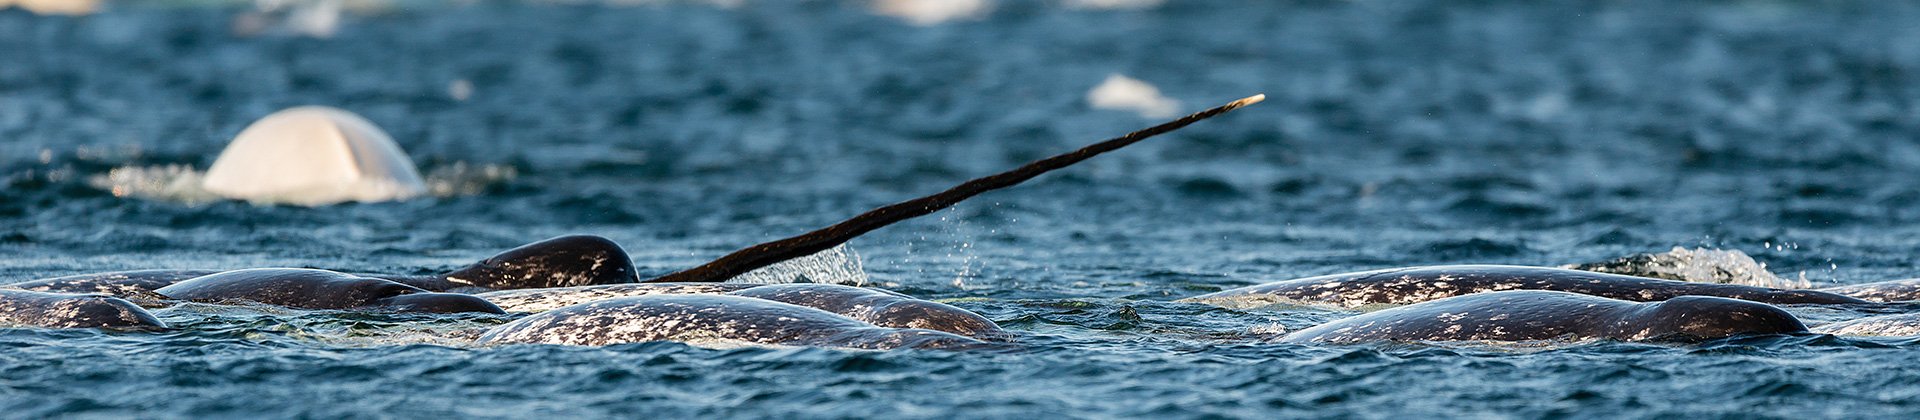 Narwhals Canadian Arctic